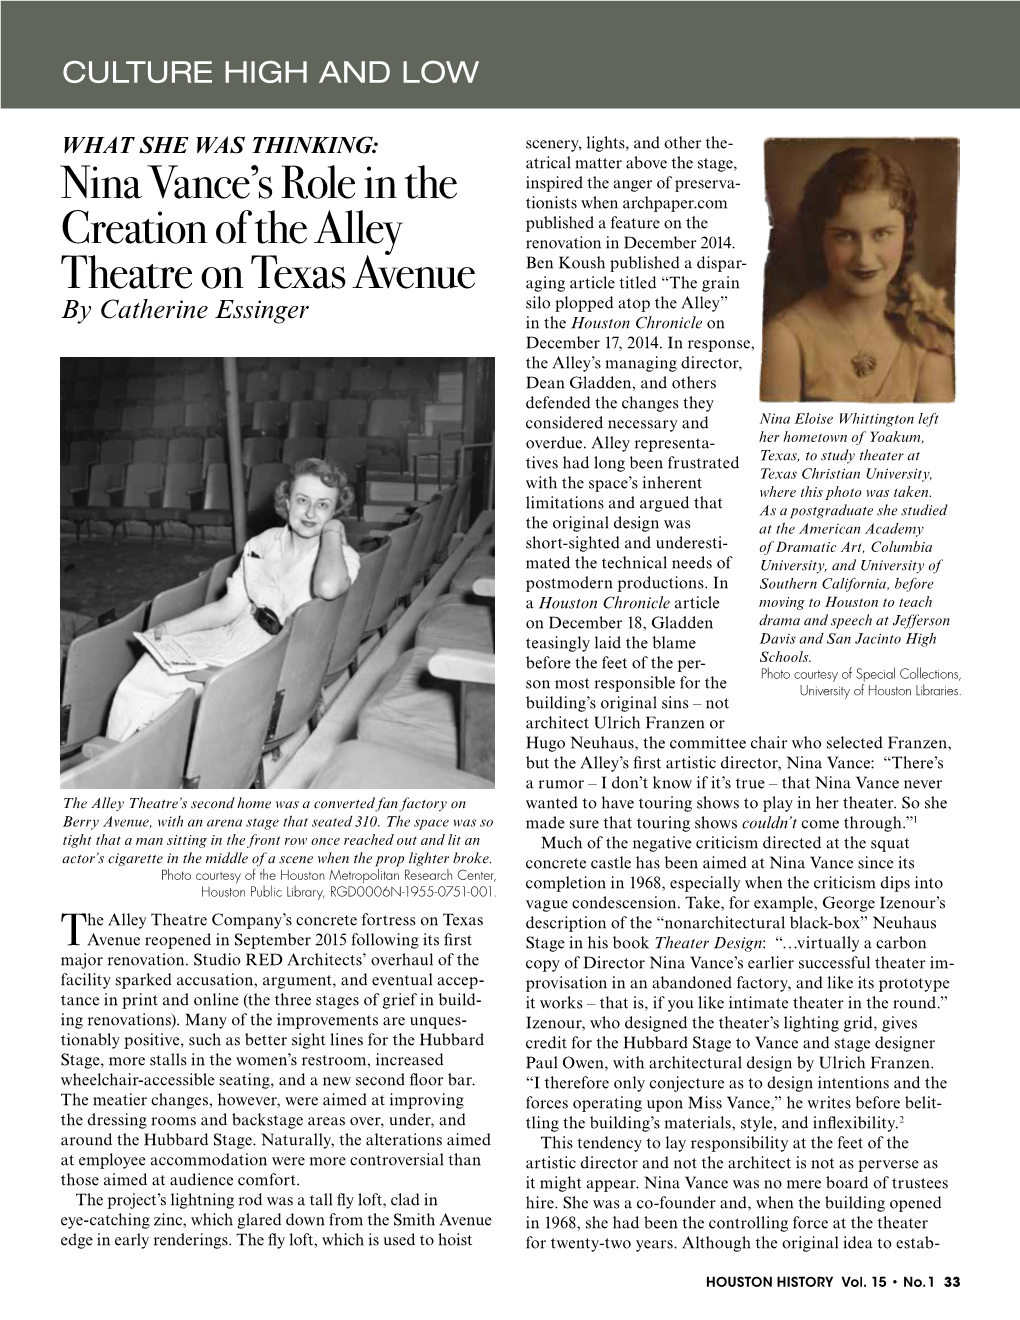 Nina Vance's Role in the Creation of the Alley Theatre on Texas Avenue